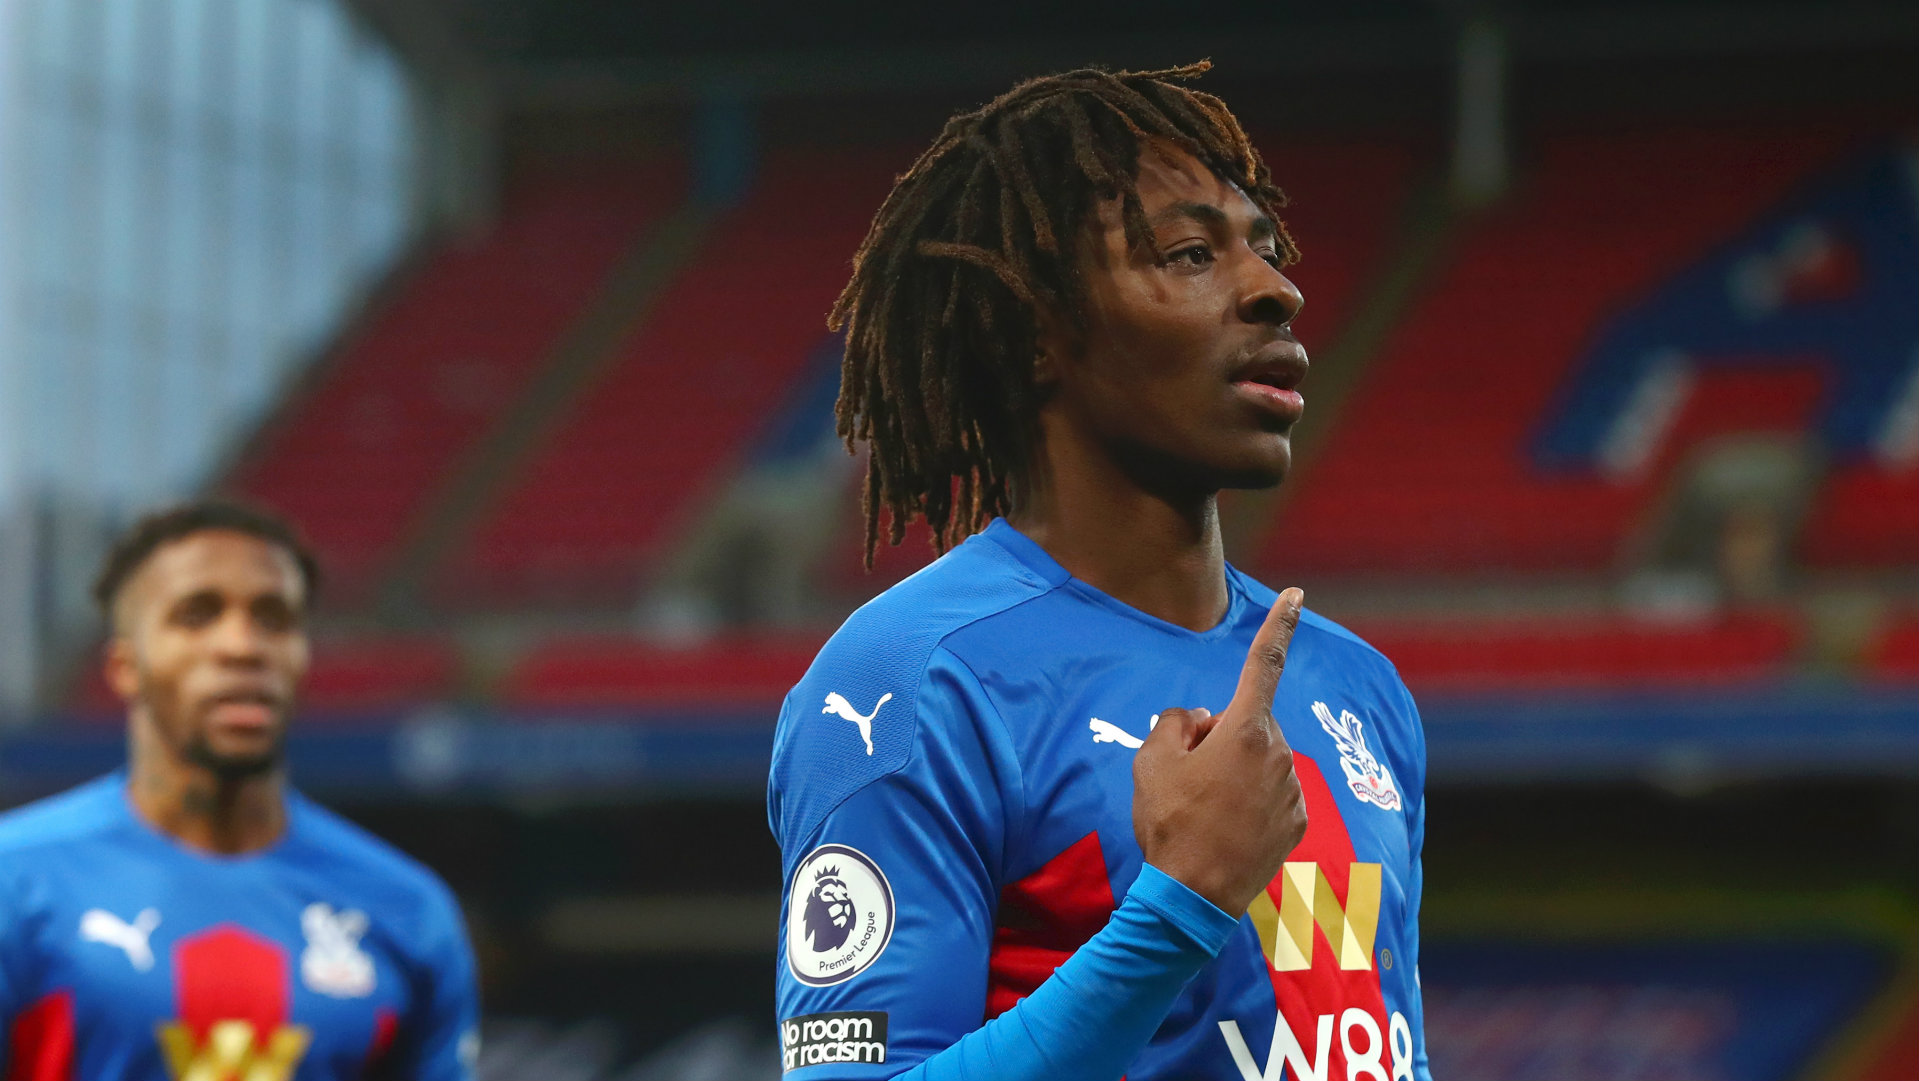 Eze can’t wait for ‘beautiful’ Crystal Palace return after injury layoff